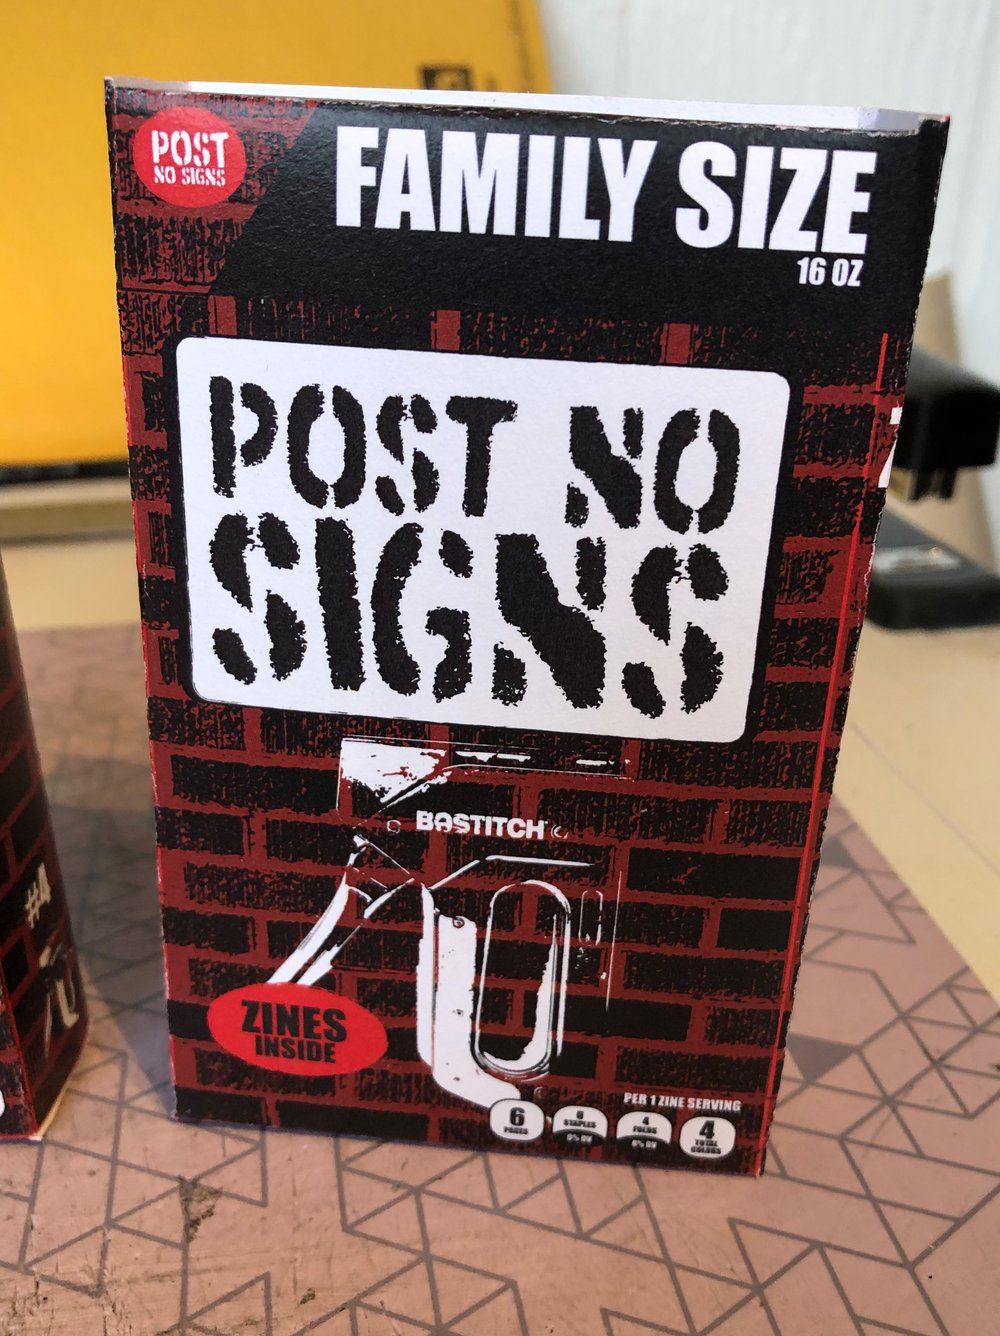 Post No Signs Mini Cereal Box (and zines)